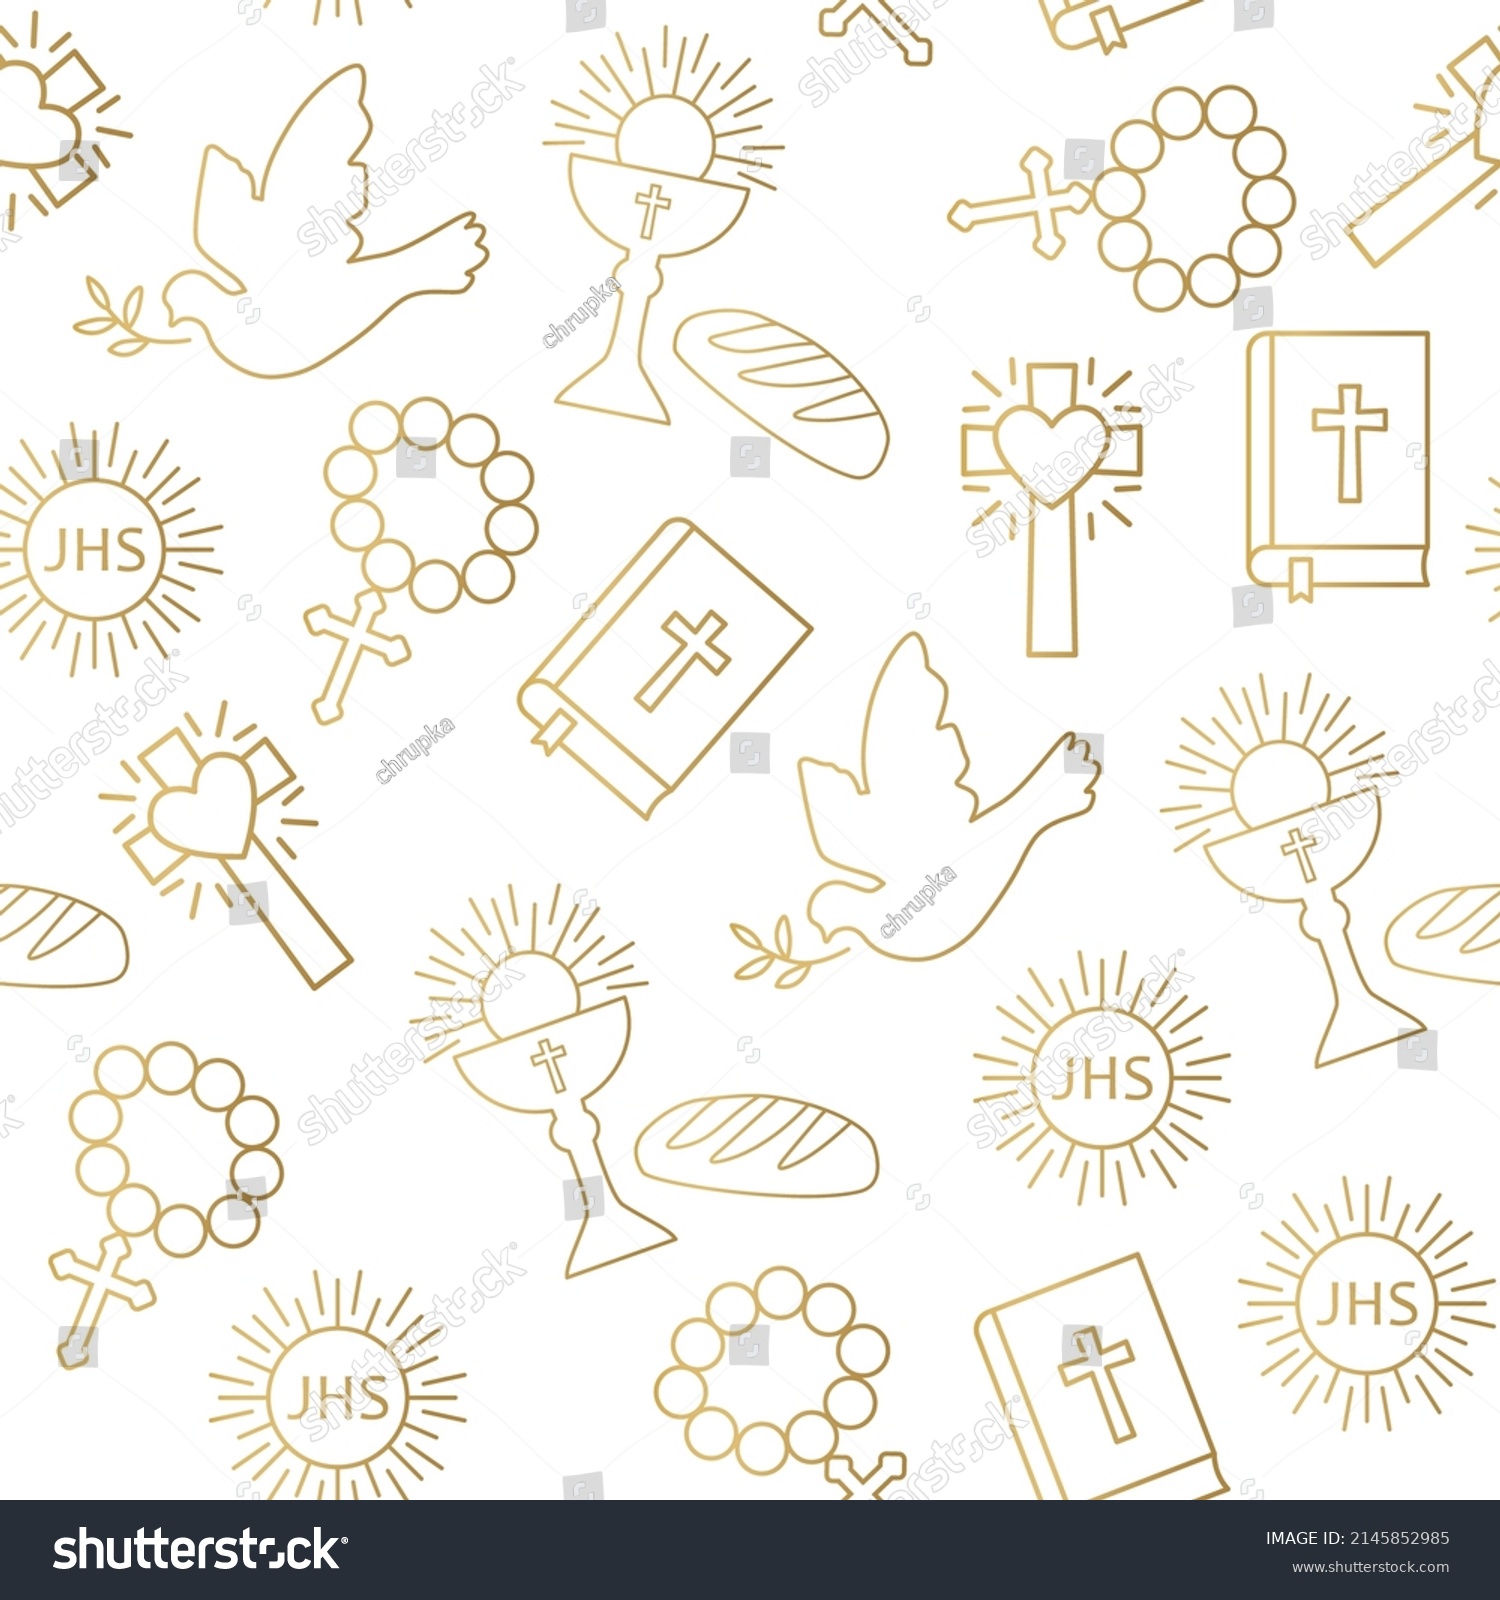 SVG of seamless golden pattern with christian religion icons- vector illustration svg